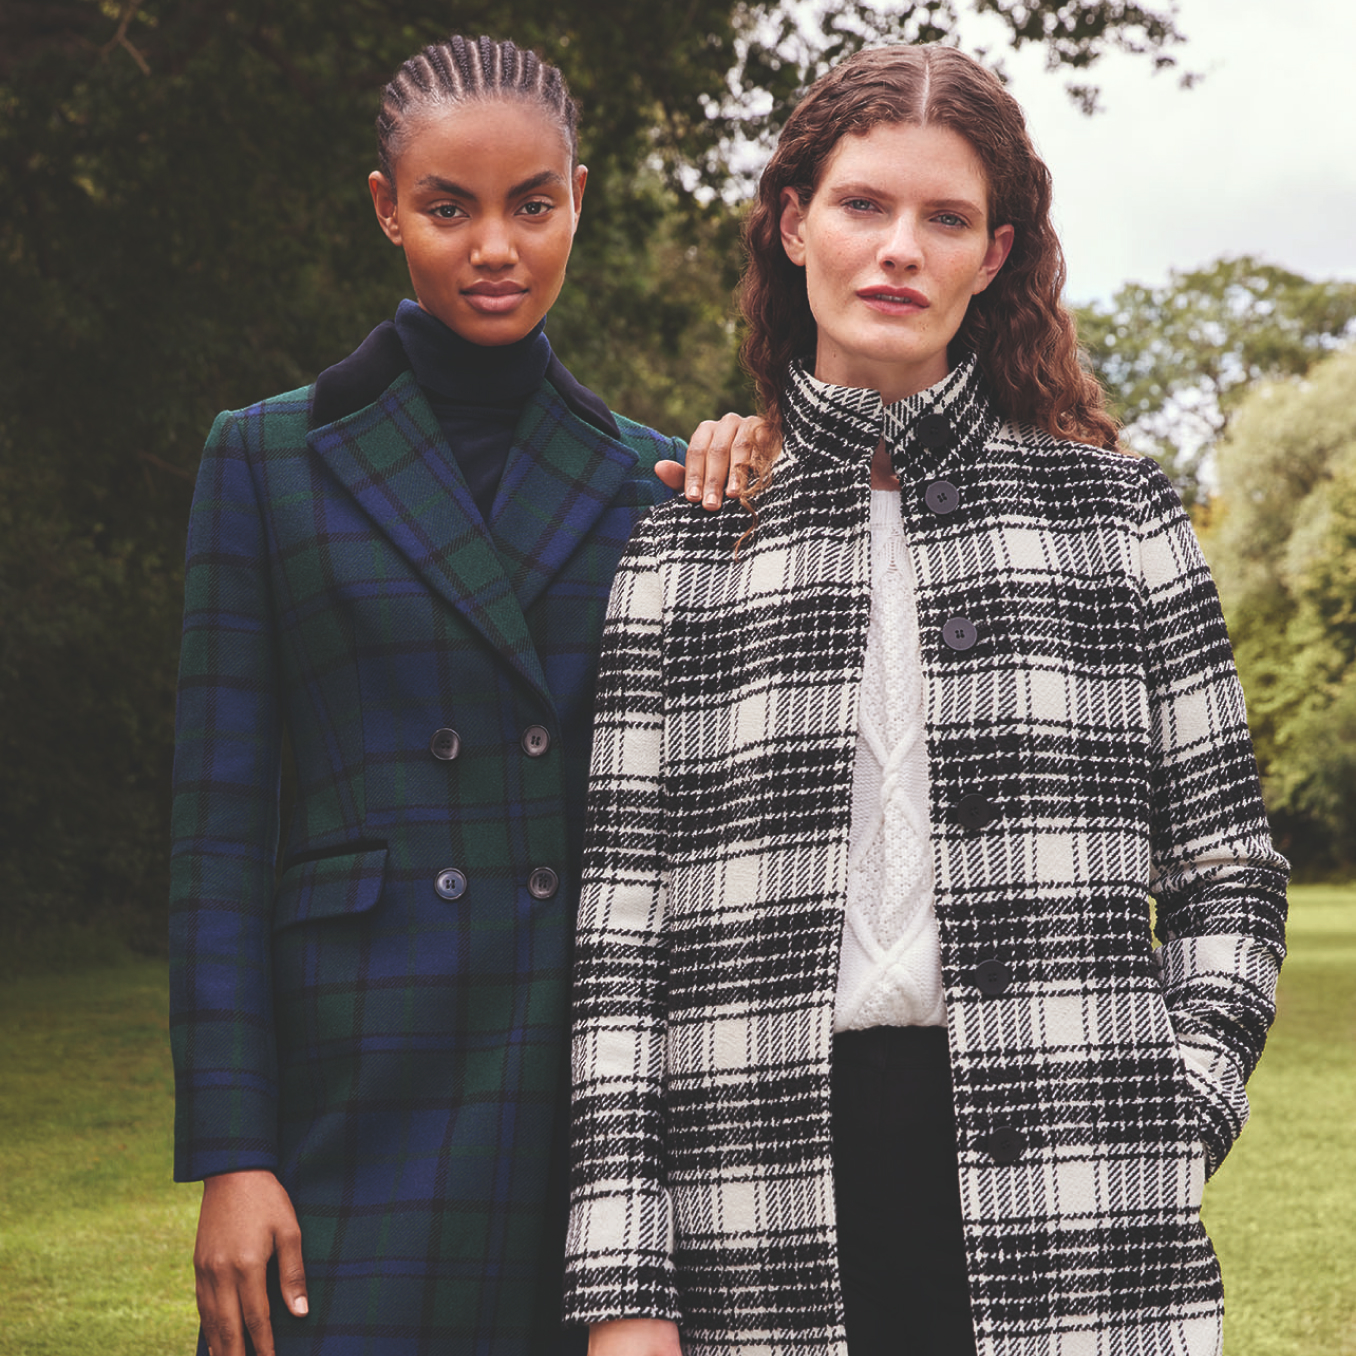 Image of two models wearing check wool coats standing in front of a sculpture.